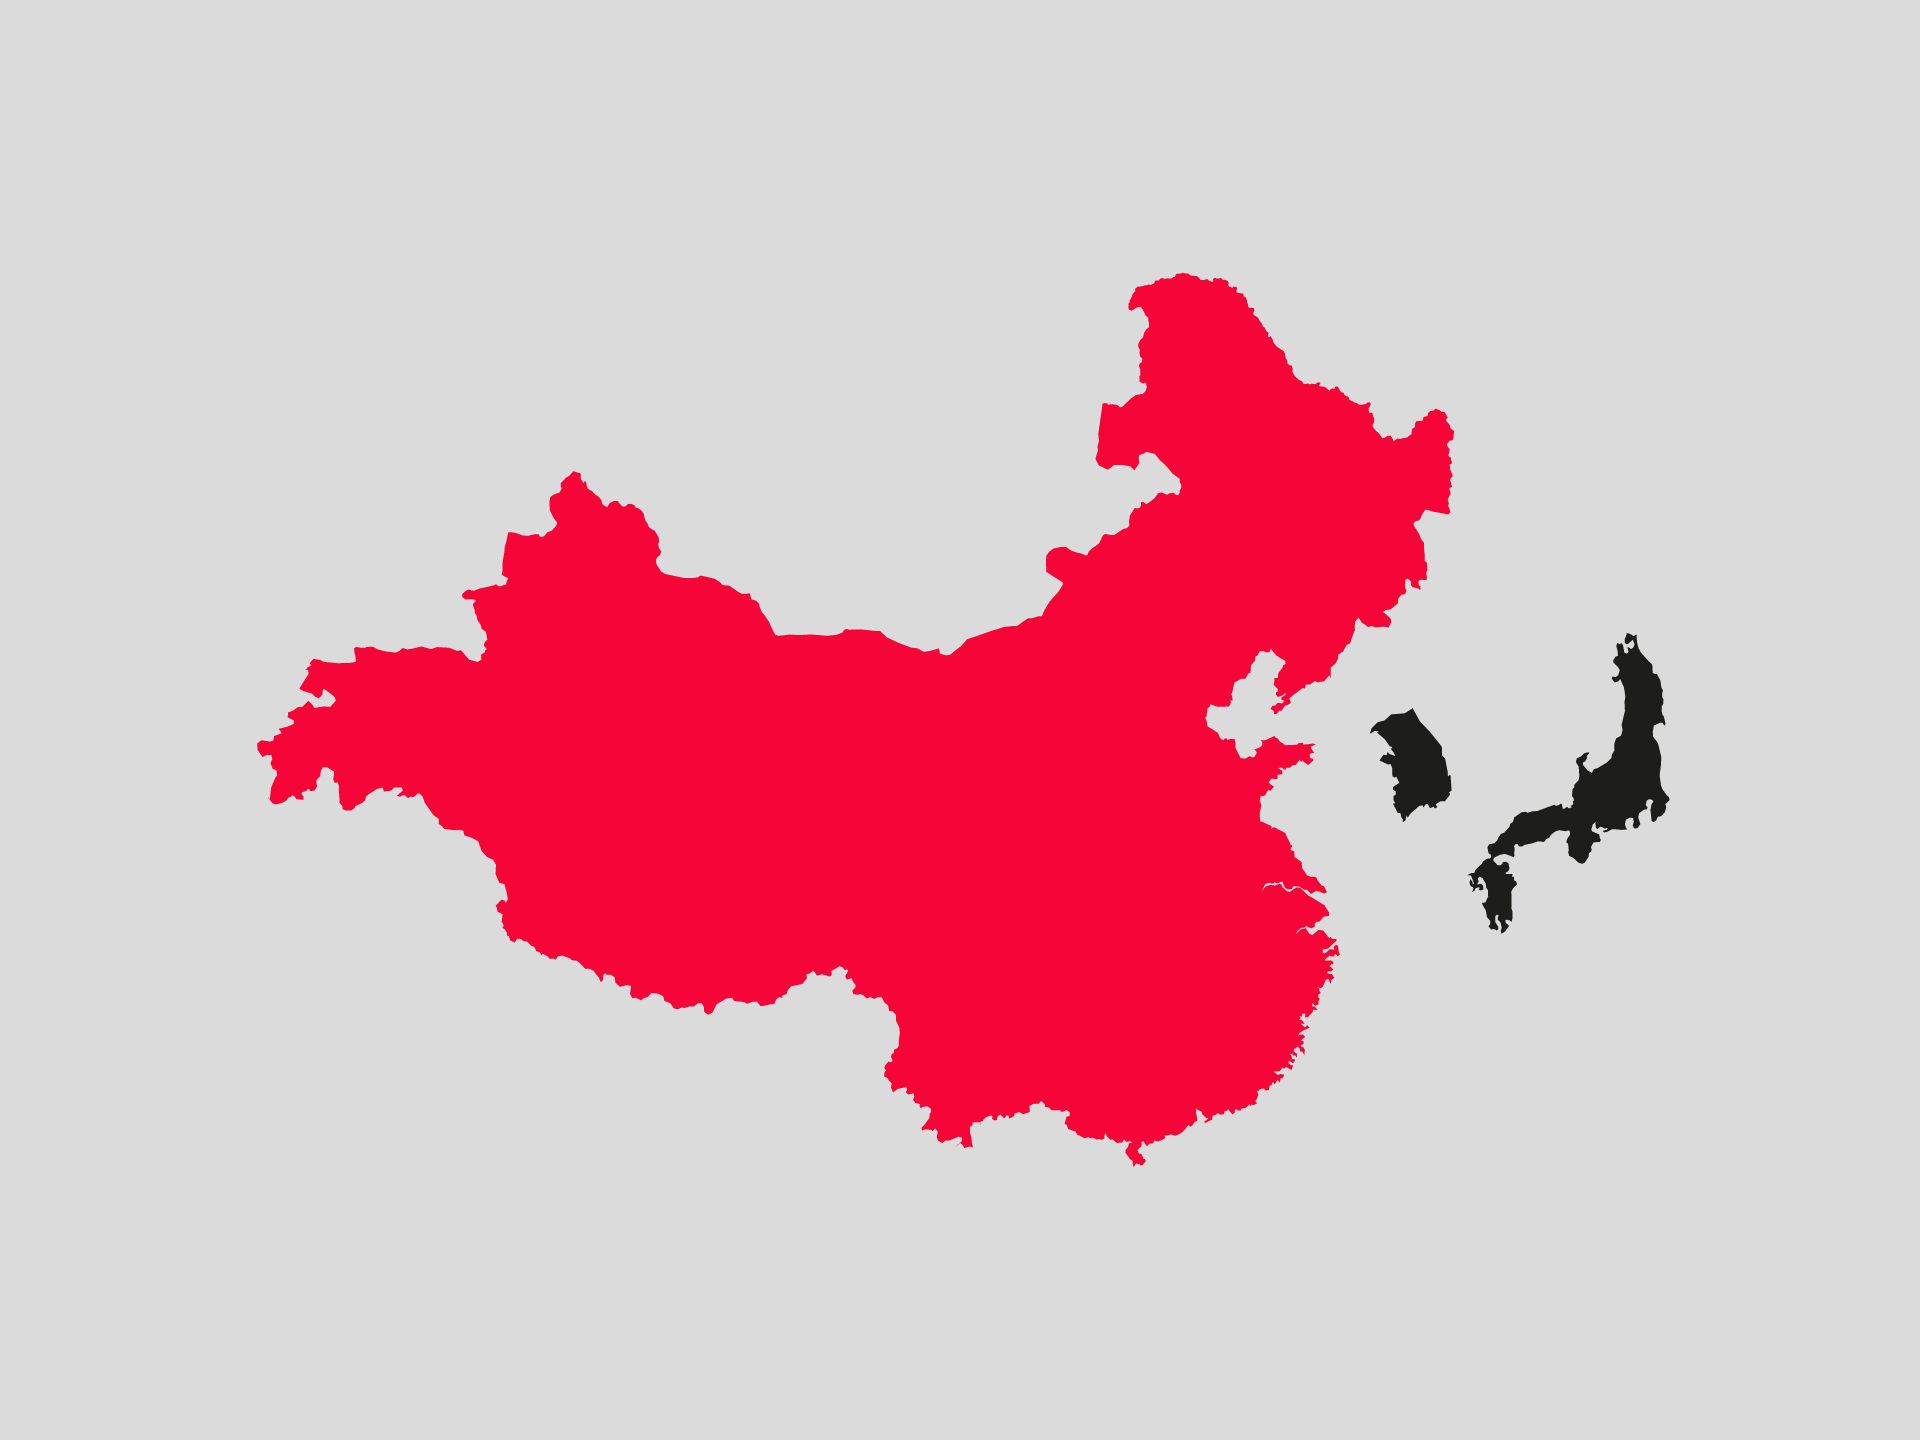 This map shows China, South Korea and Japan, with China highlighted in color.